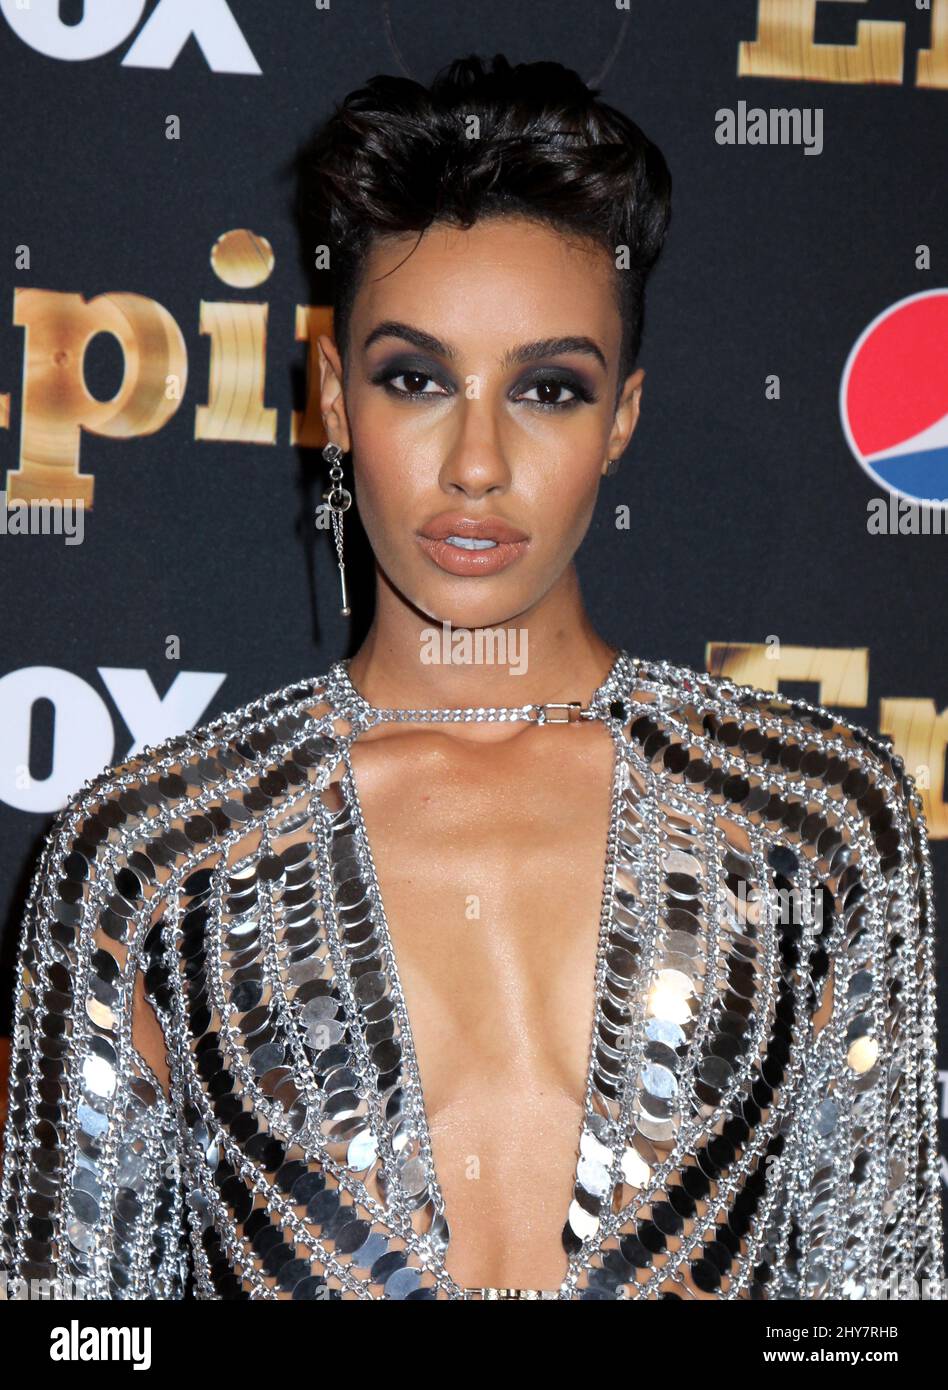 AzMarie Livingston attending the 'Empire' Season 2 Premiere held at Carnegie Hall in New York, USA. Stock Photo